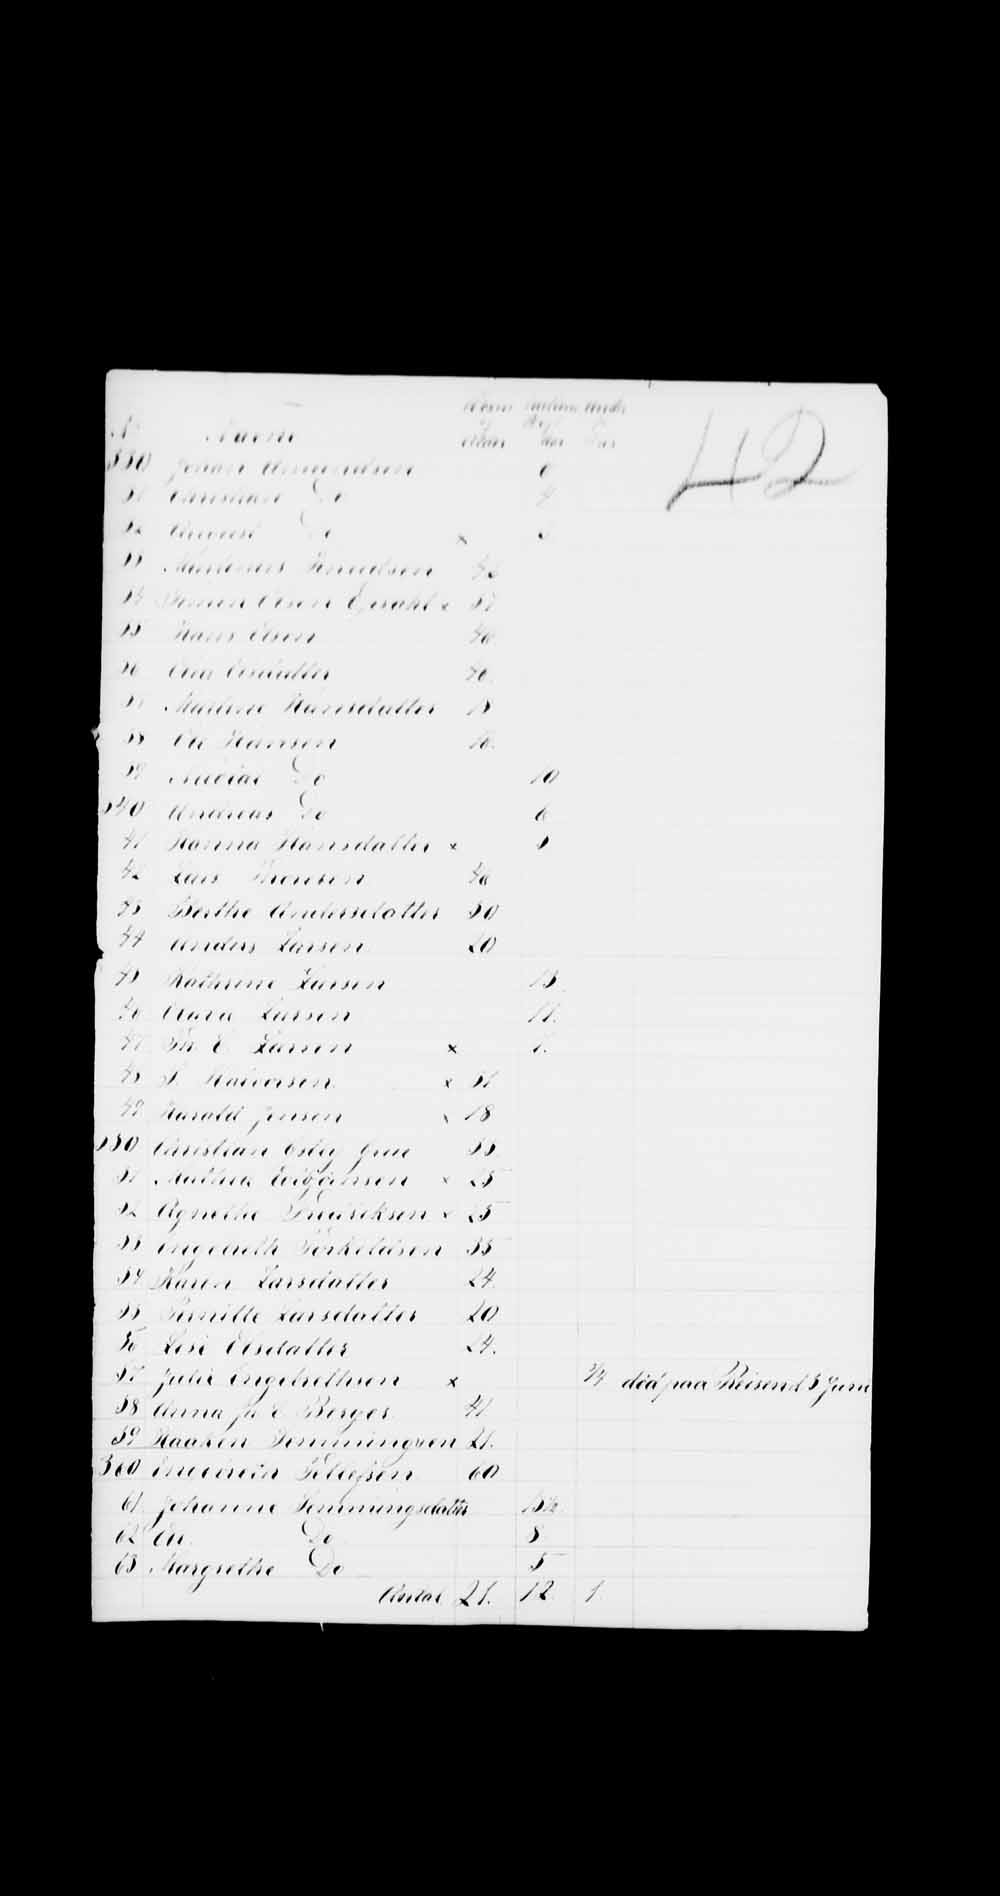 Digitized page of Passenger Lists for Image No.: e003530323